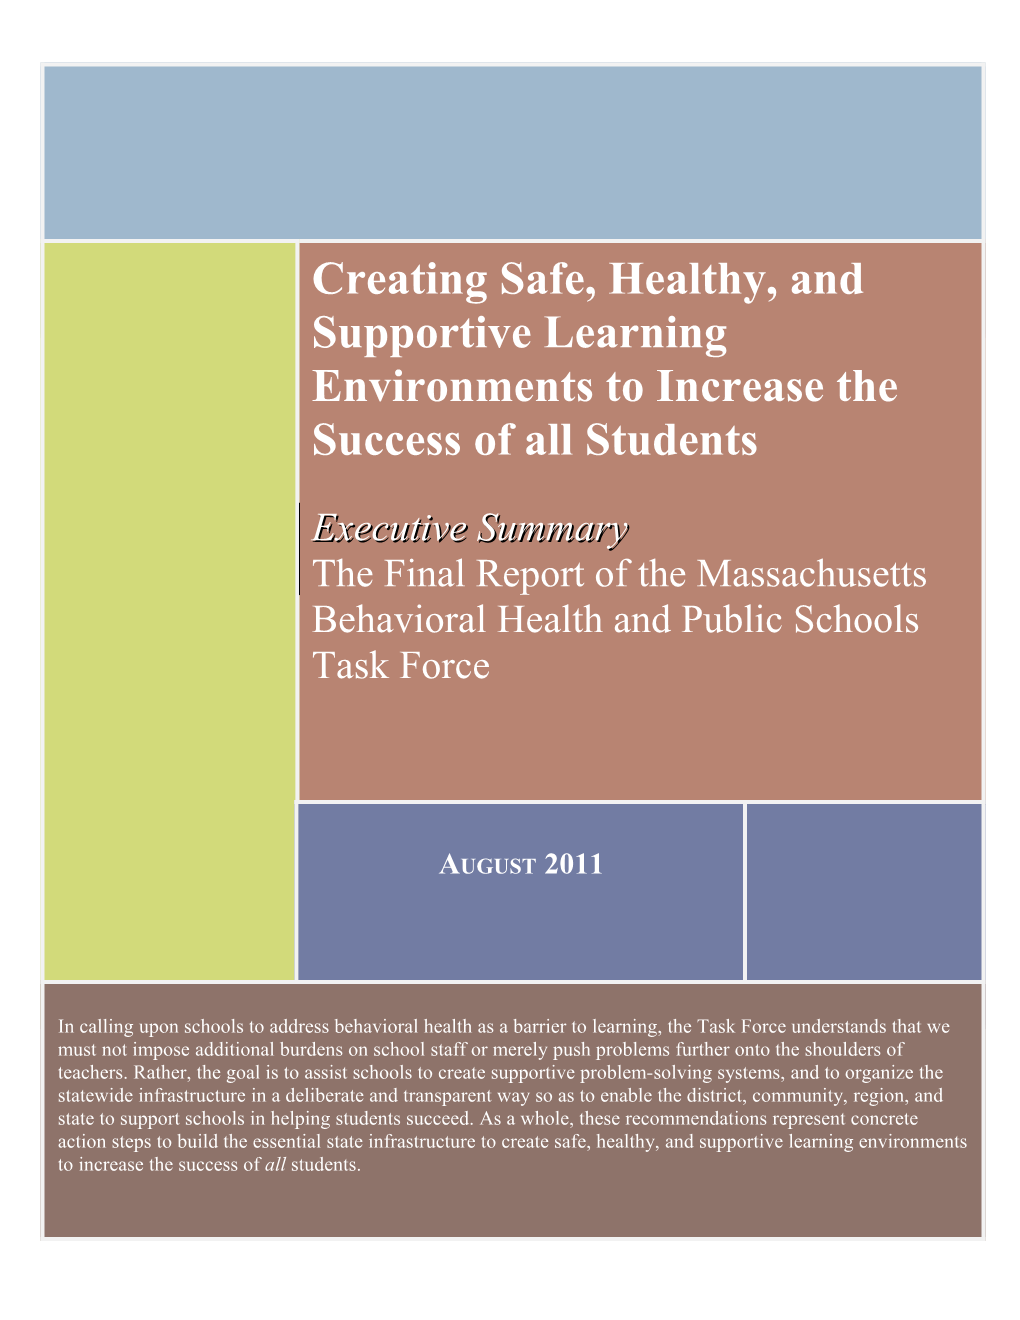 A Report of the Massachusetts Behavioral Health and Public Schools Task Force: Executive Summary